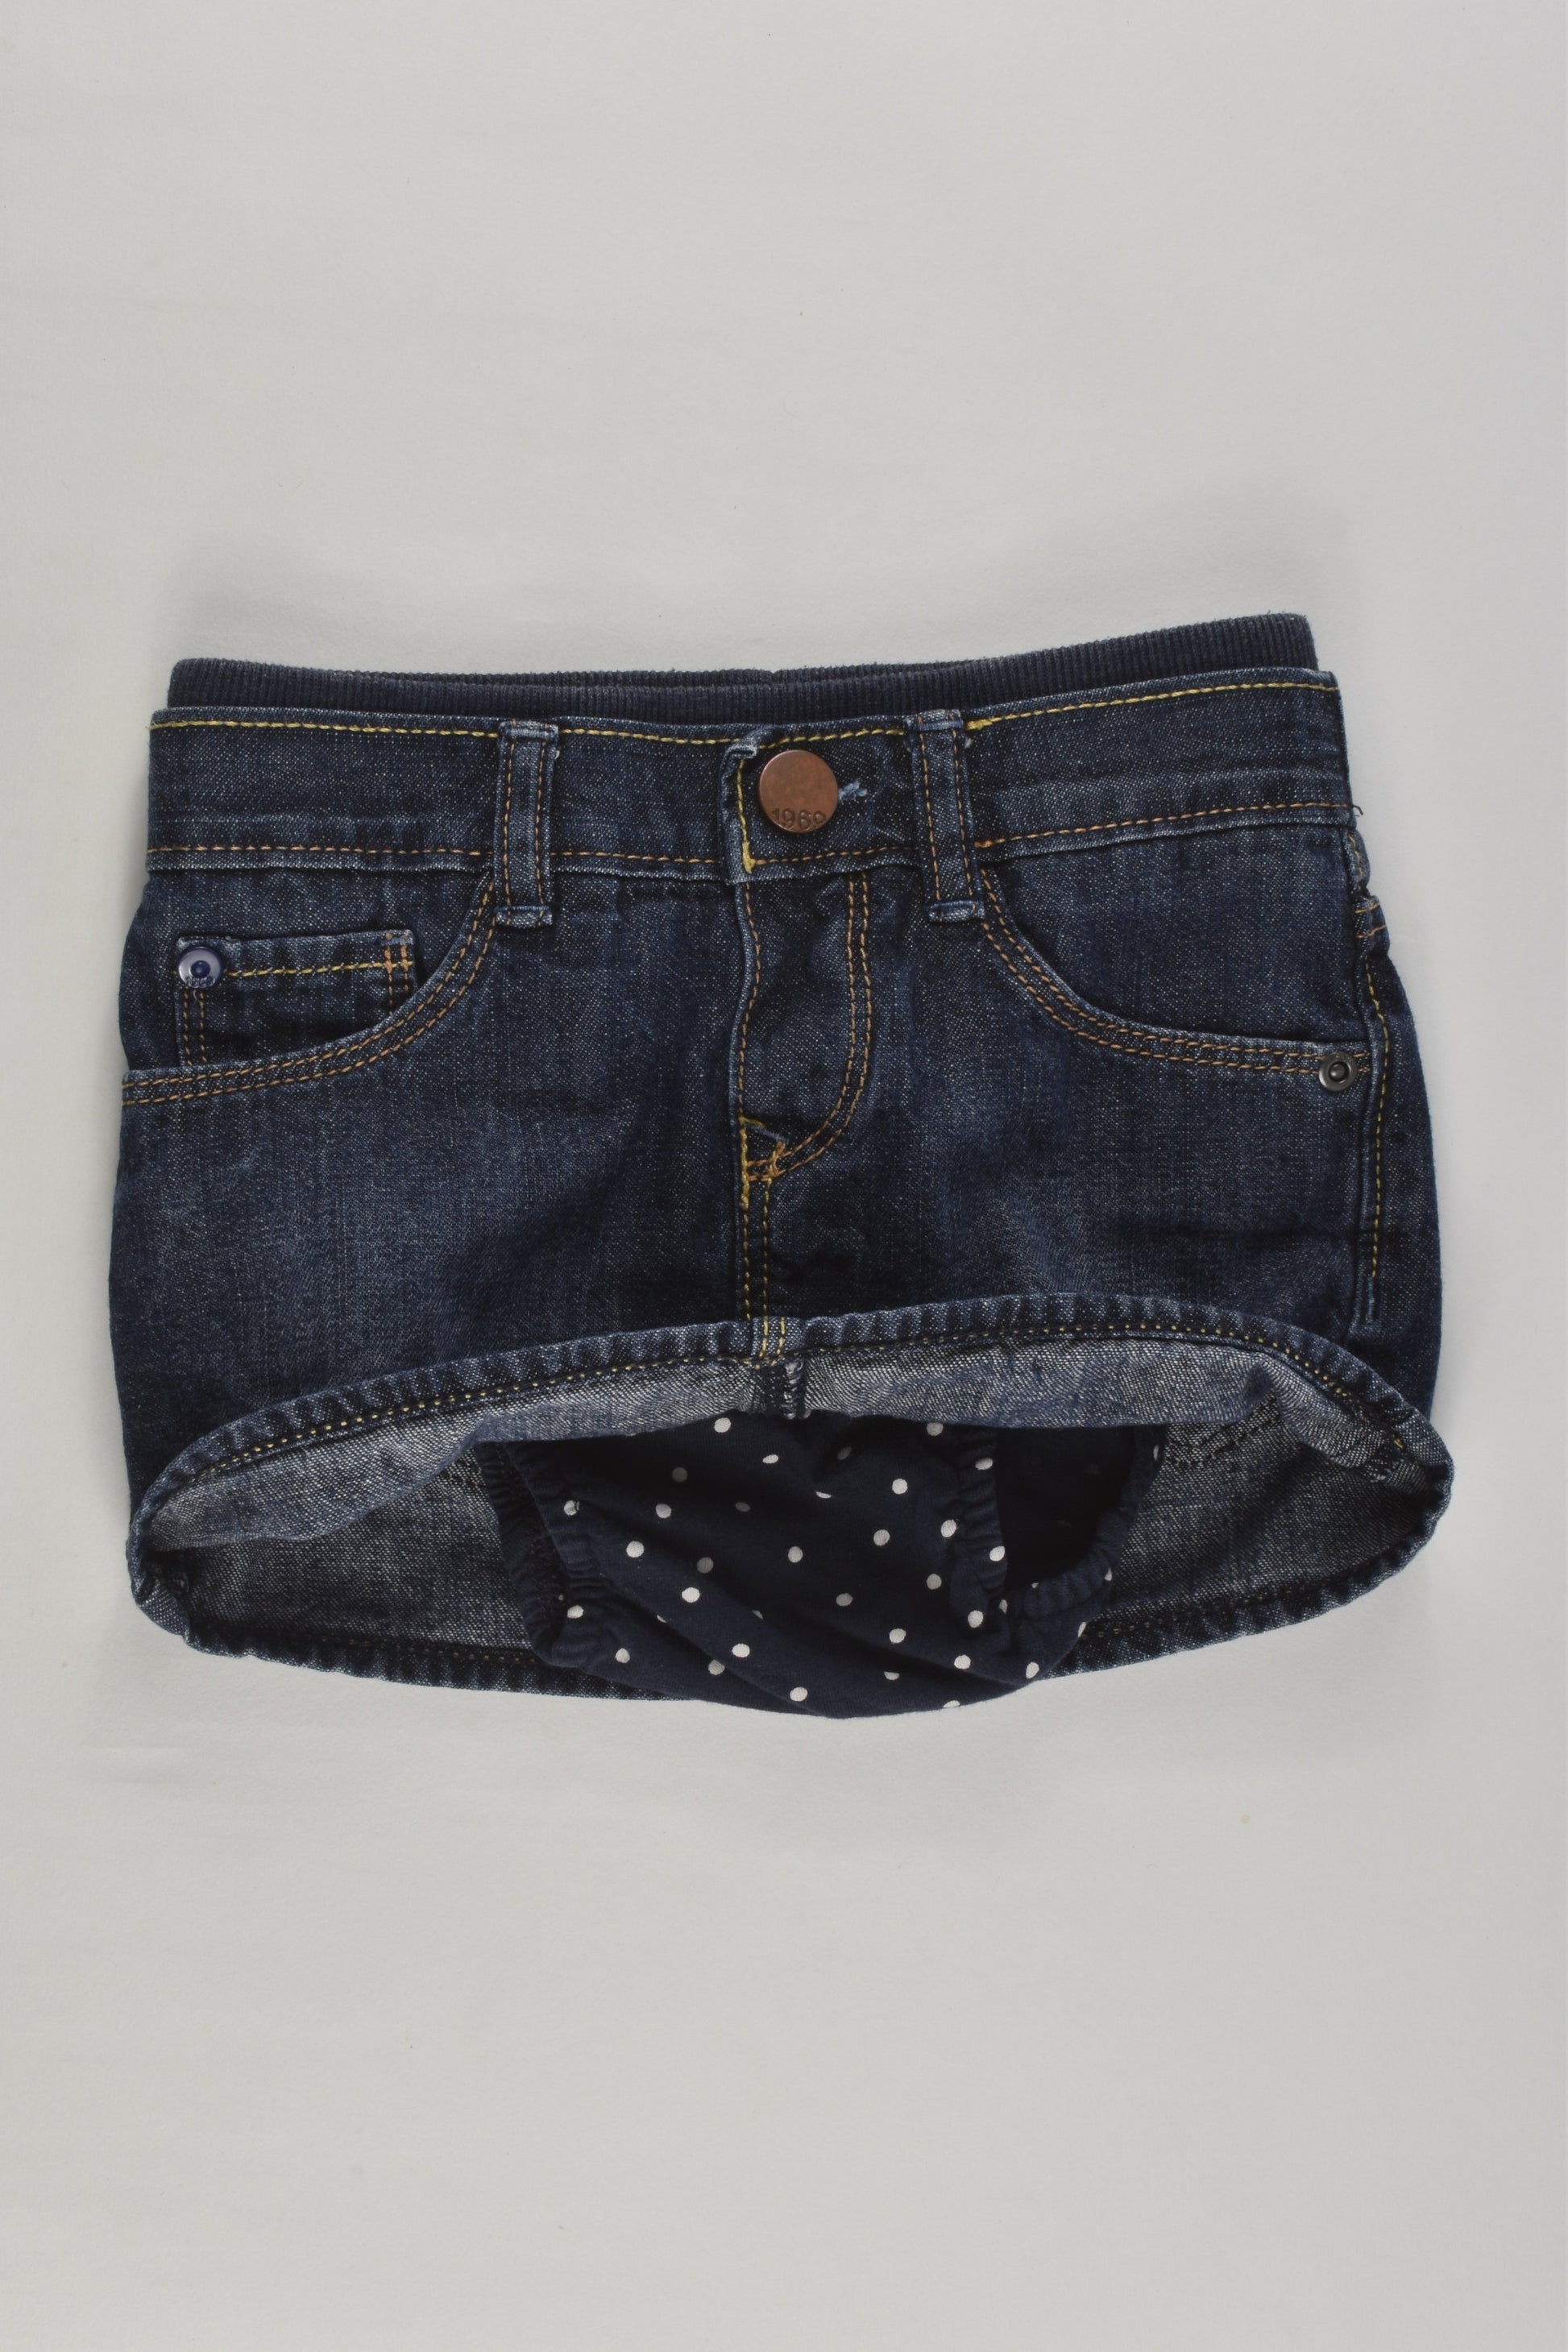 Baby Gap Size 1 (12-18 months) Denim Skirt with Nappy Cover Underneath